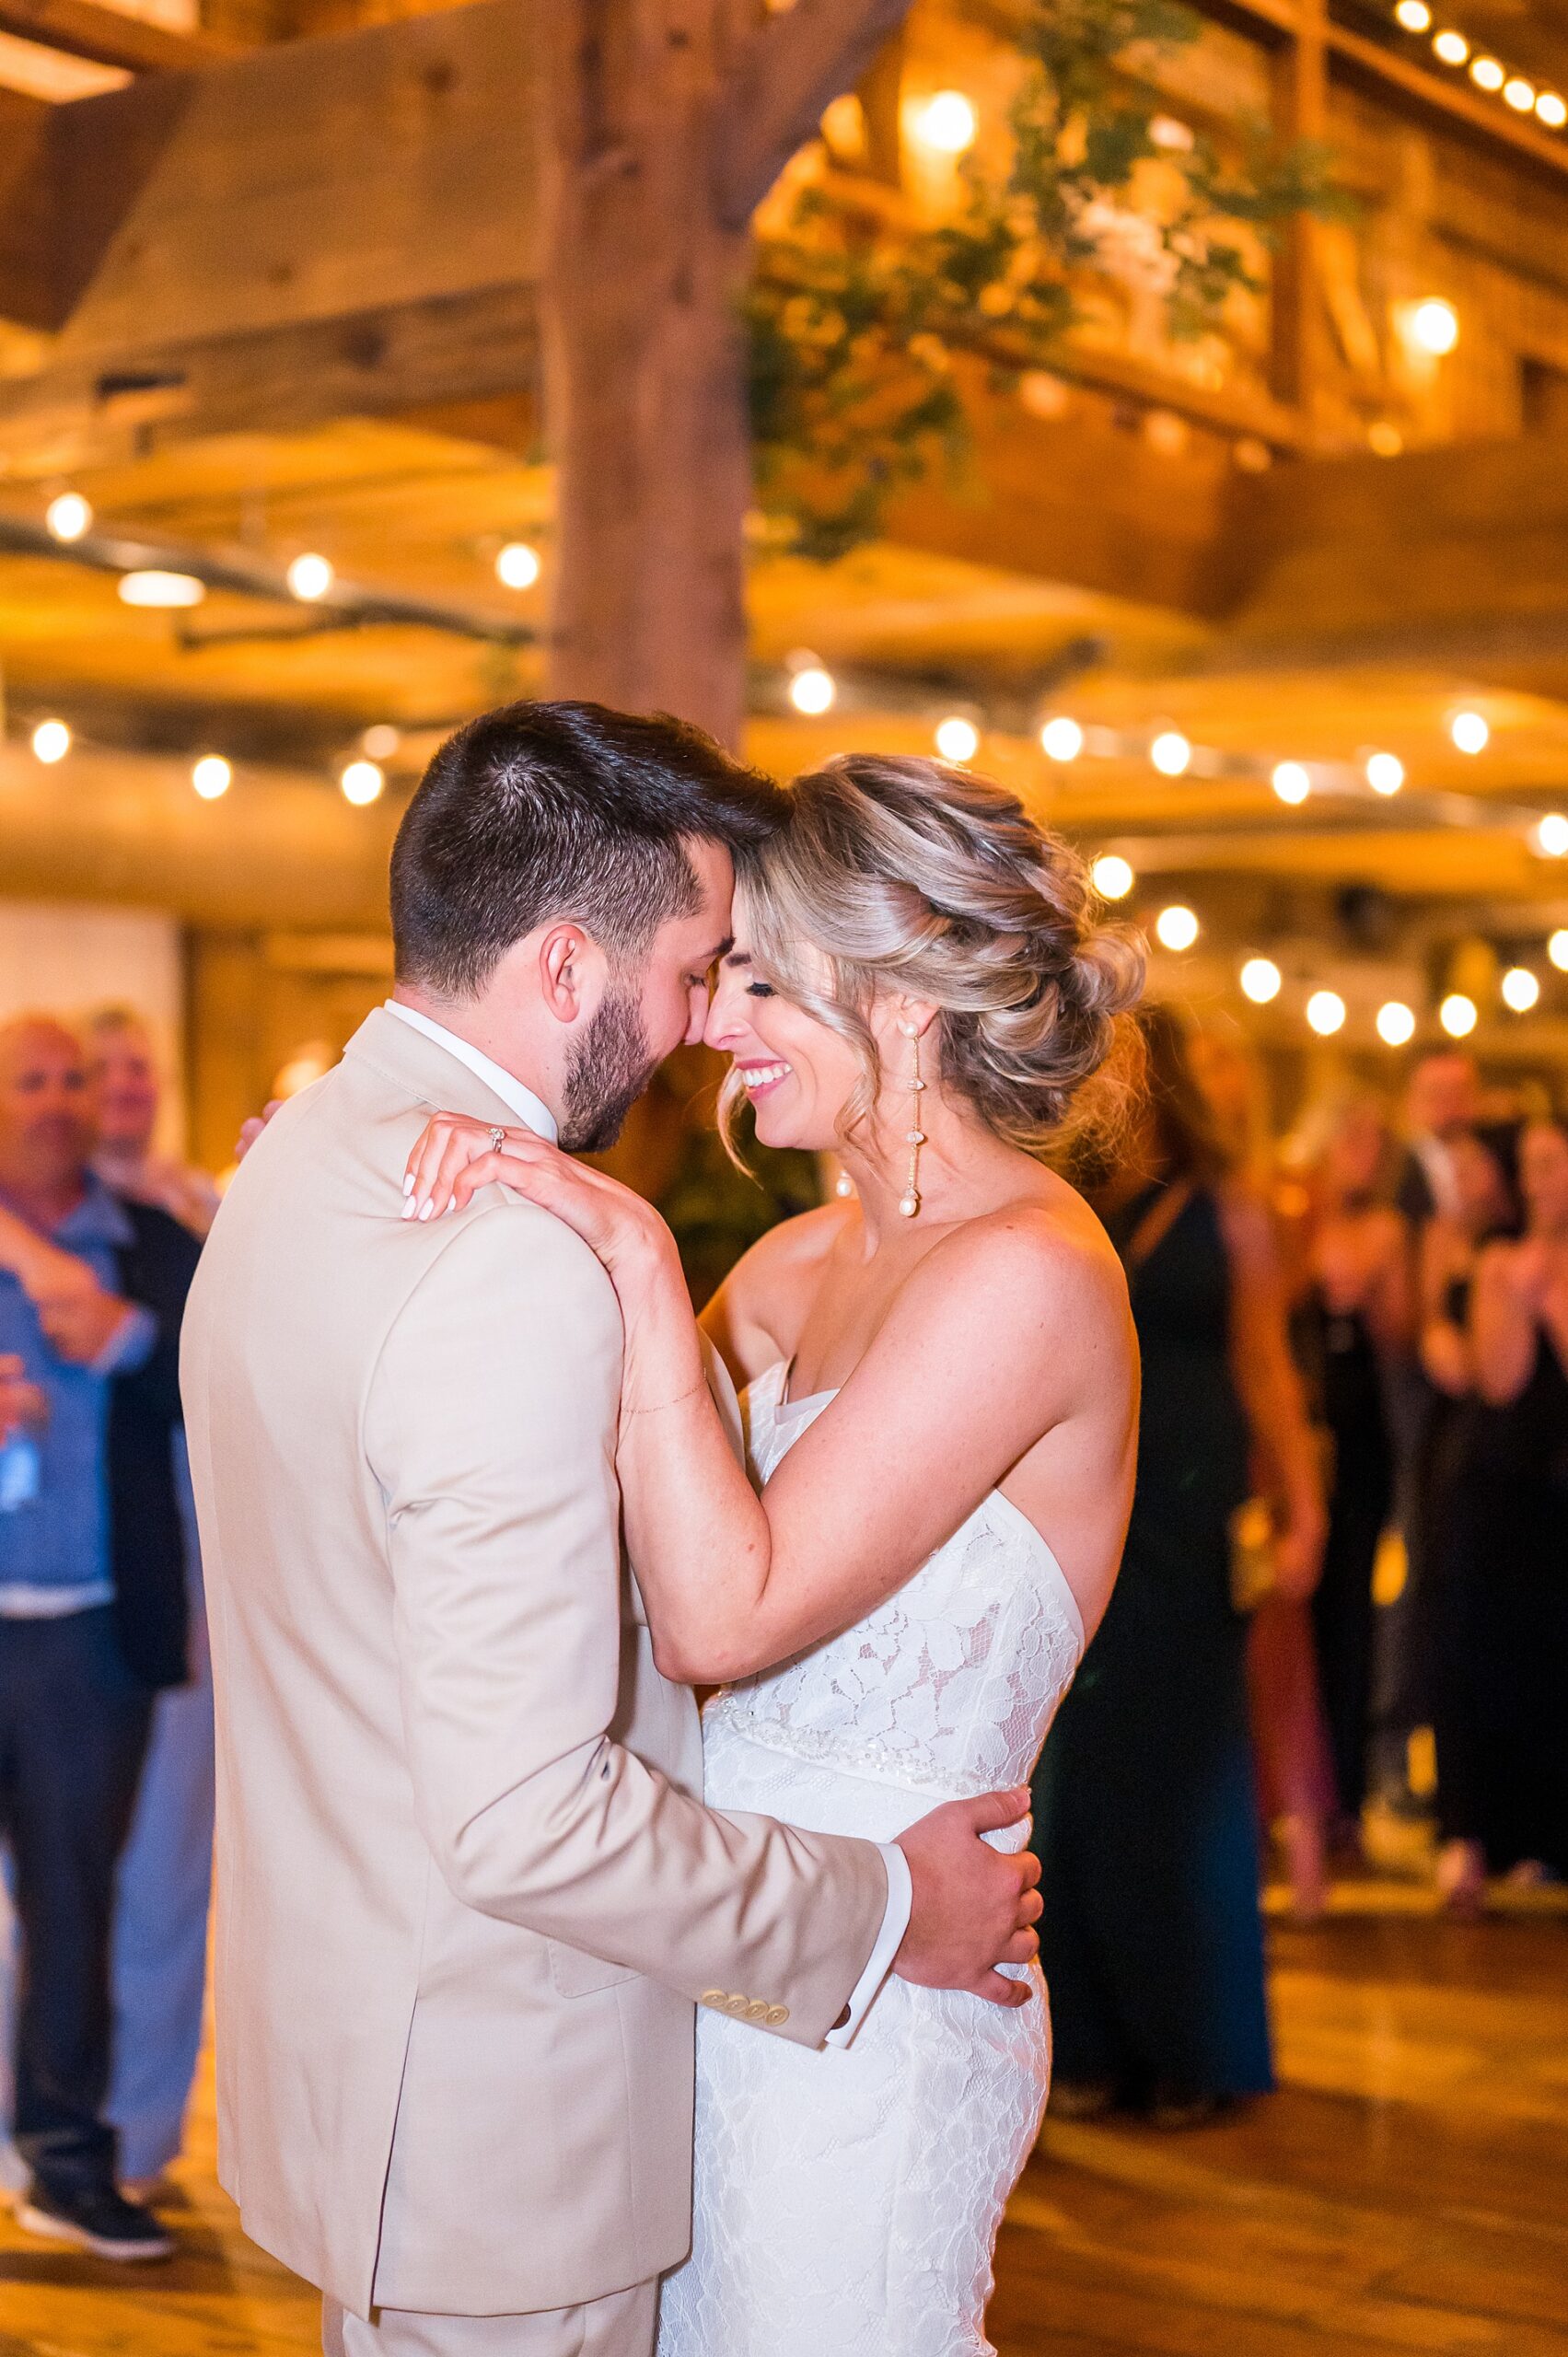 newlyweds share first dance at reception